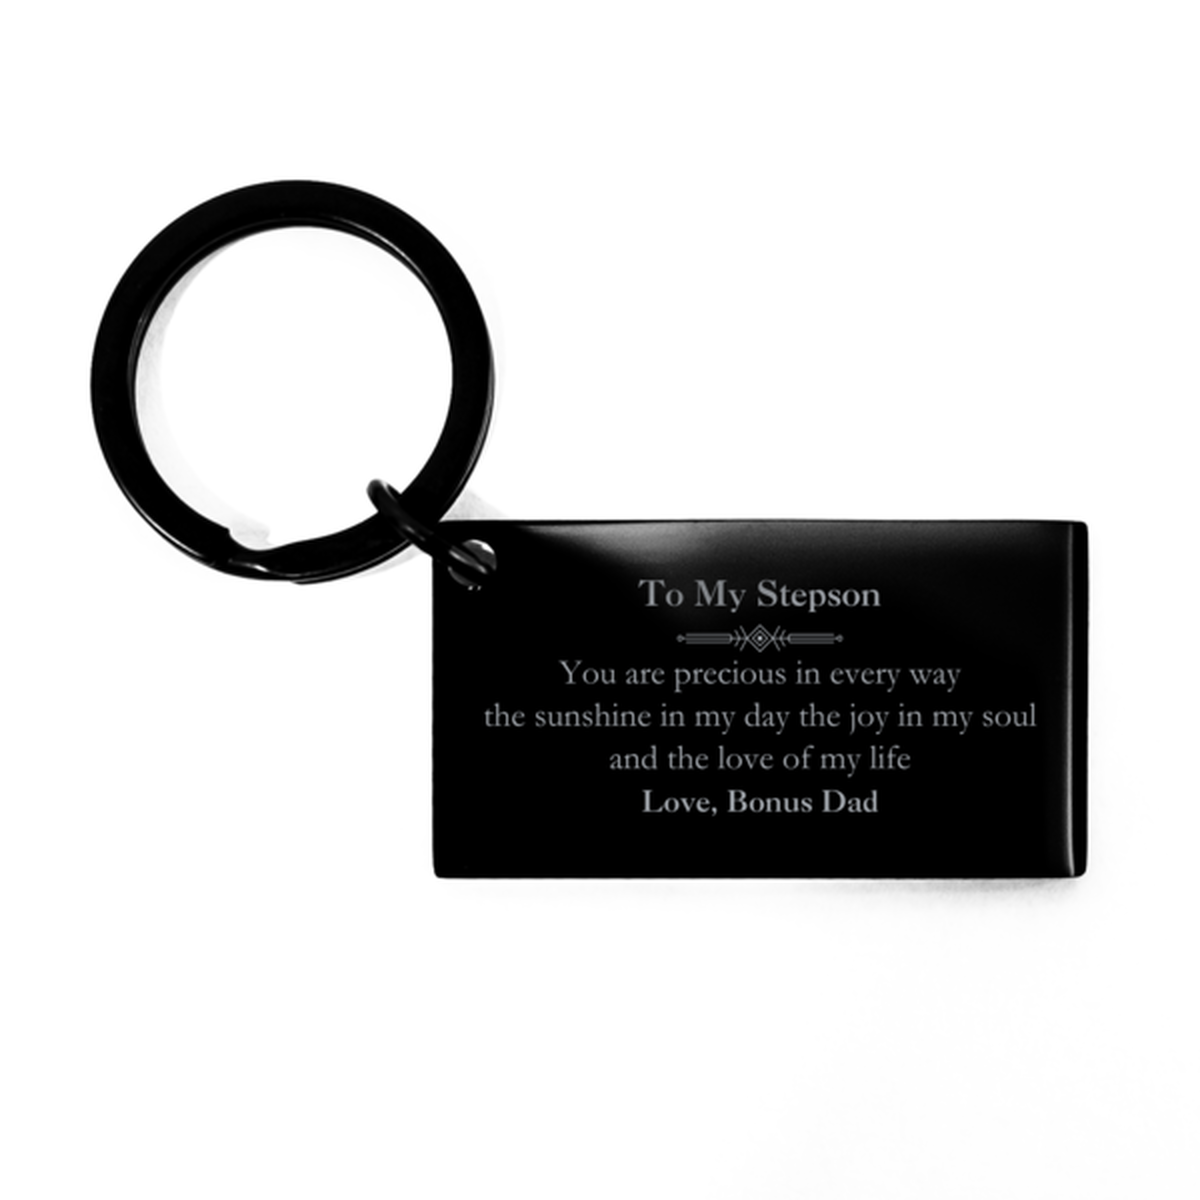 Graduation Gifts for Stepson Keychain Present from Bonus Dad, Christmas Stepson Birthday Gifts Stepson You are precious in every way the sunshine in my day. Love, Bonus Dad